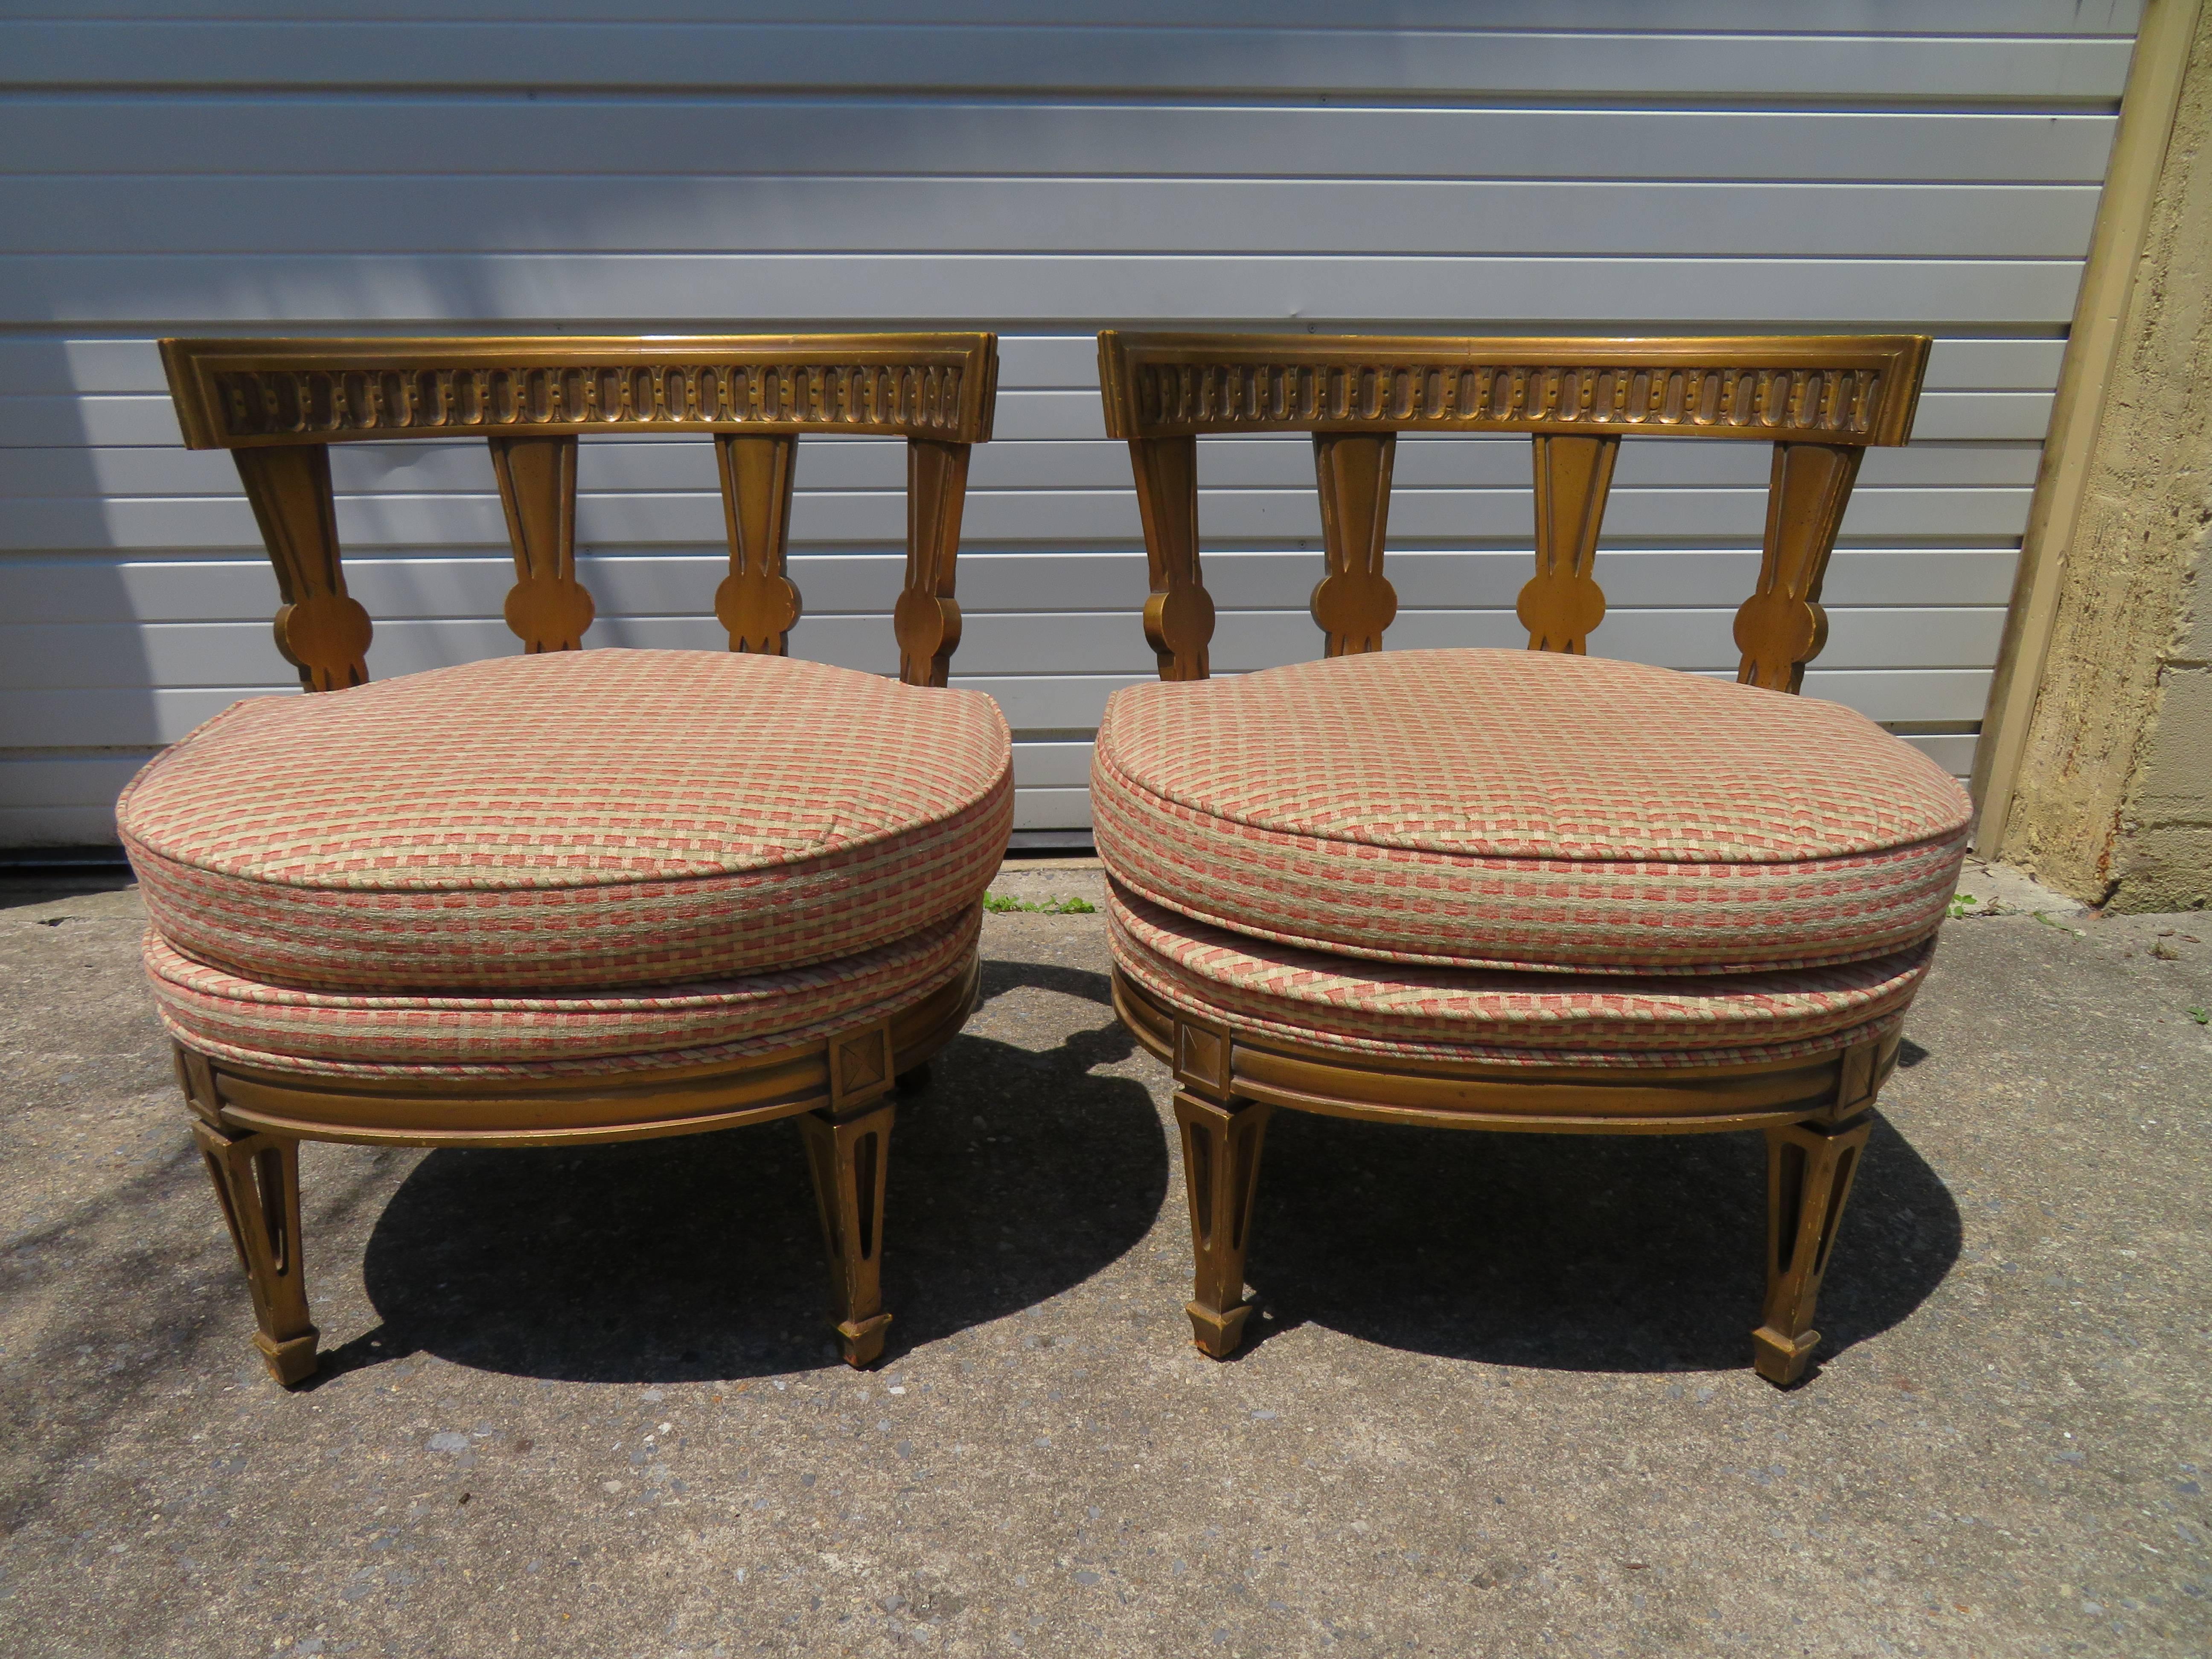 Stunning pair of Hollywood Regency Maison Jansen style slipper chairs. Chairs have well carved frames with classical details to the backs and legs. The distressed gold finish-adds tremendous vintage charm.